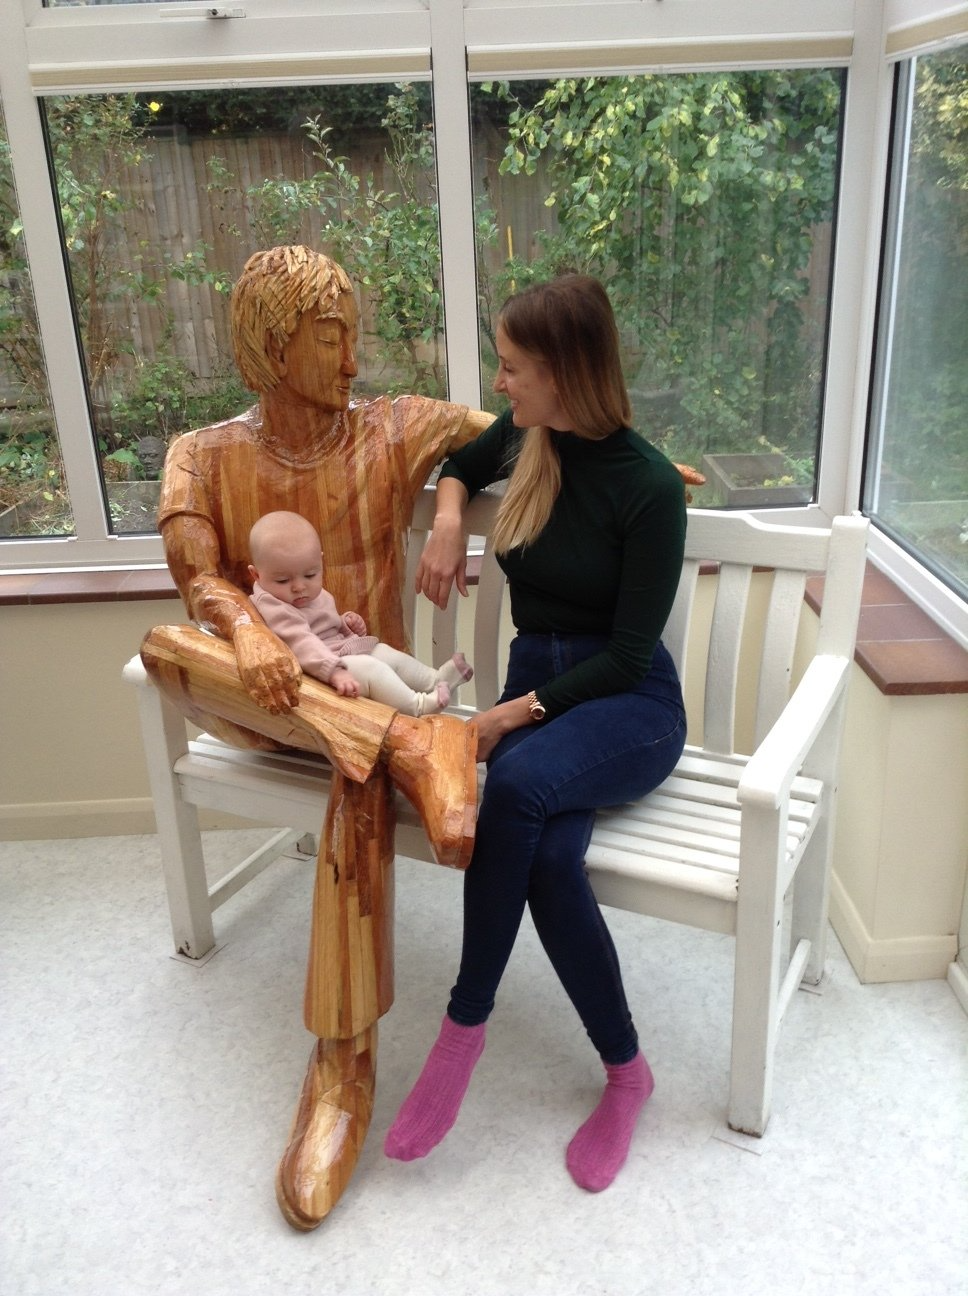 Mother and child sitting with a wooden sculpture of a man